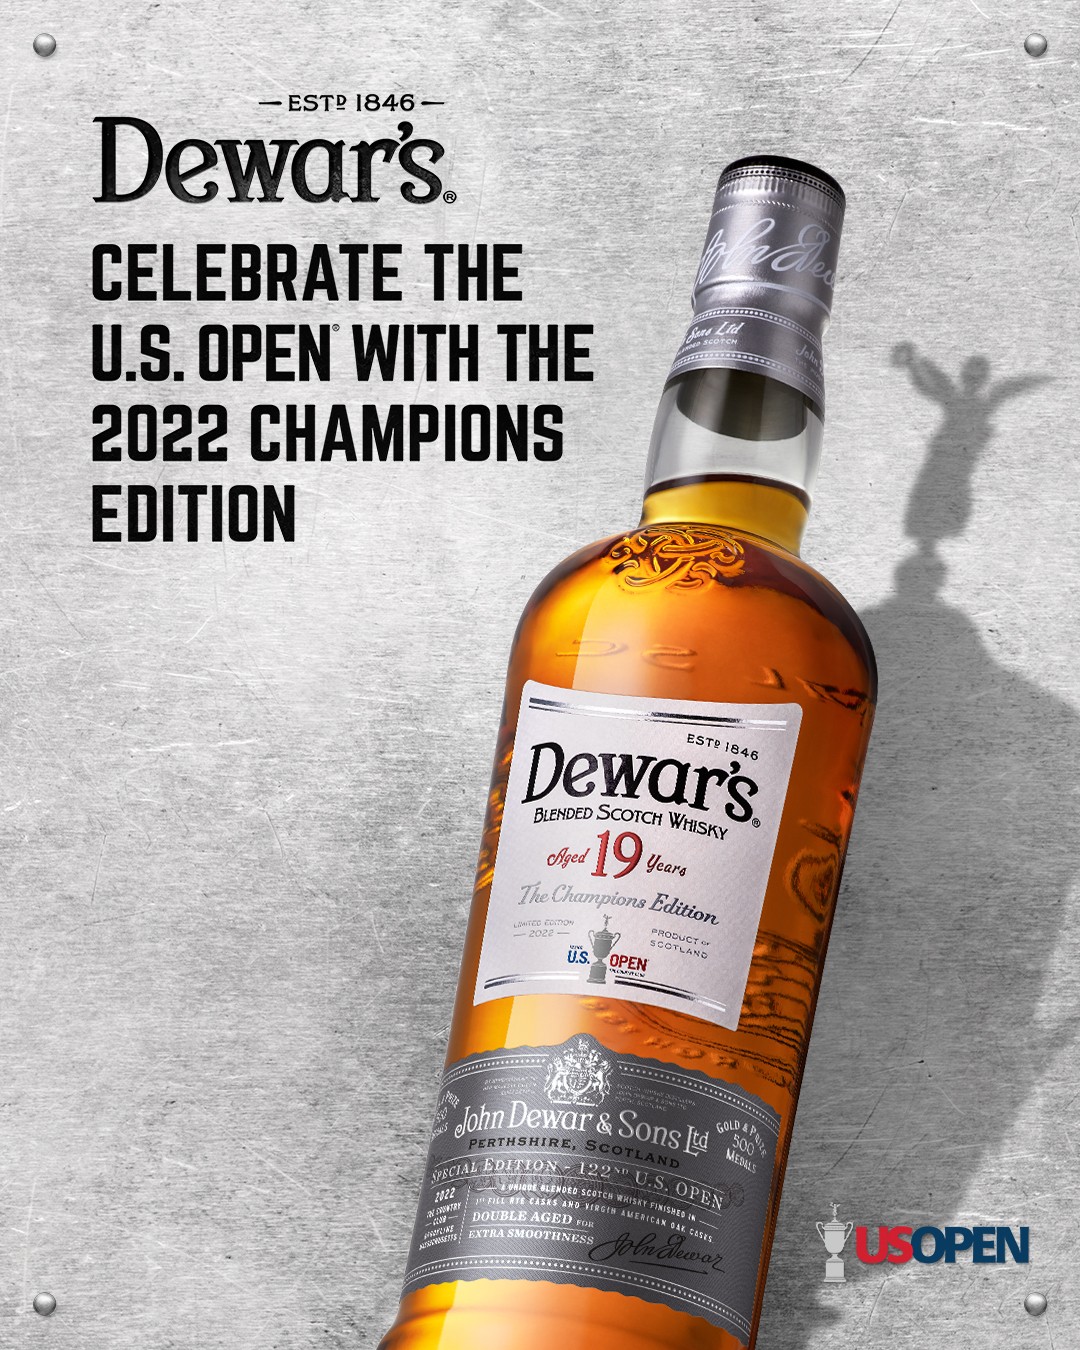 Introducing the 2022 Dewar’s 19-Year Old Limited Edition. Dubbed The Champions Edition, this latest expression from Dewar’s is extra-matured in New American Oak & 1st Fill Rye Casks to produce a complex yet balanced Scotch Whisky which yields notes of heather honey, butterscotch and cinnamon spice before evolving into a long, rich, and fruity finish. #WhiskyCastSponsor #dewars #whiskycast #scotch